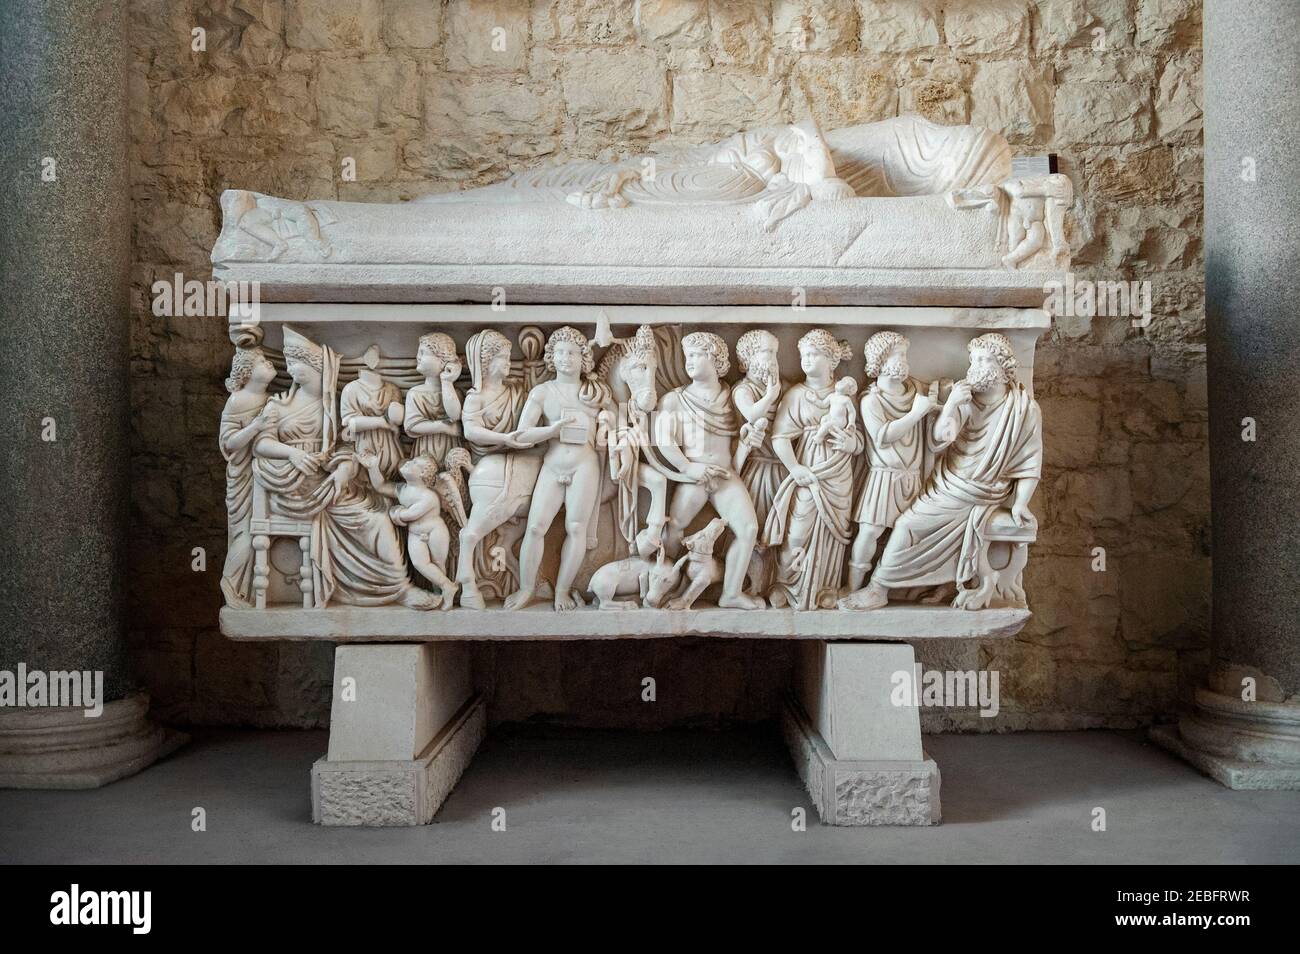 Split - Croatian - Dalmatia - August 28, 2018: The oldest museum in Croatia includes archaeological artifacts from the prehistoric, Greek, Roman, earl Stock Photo